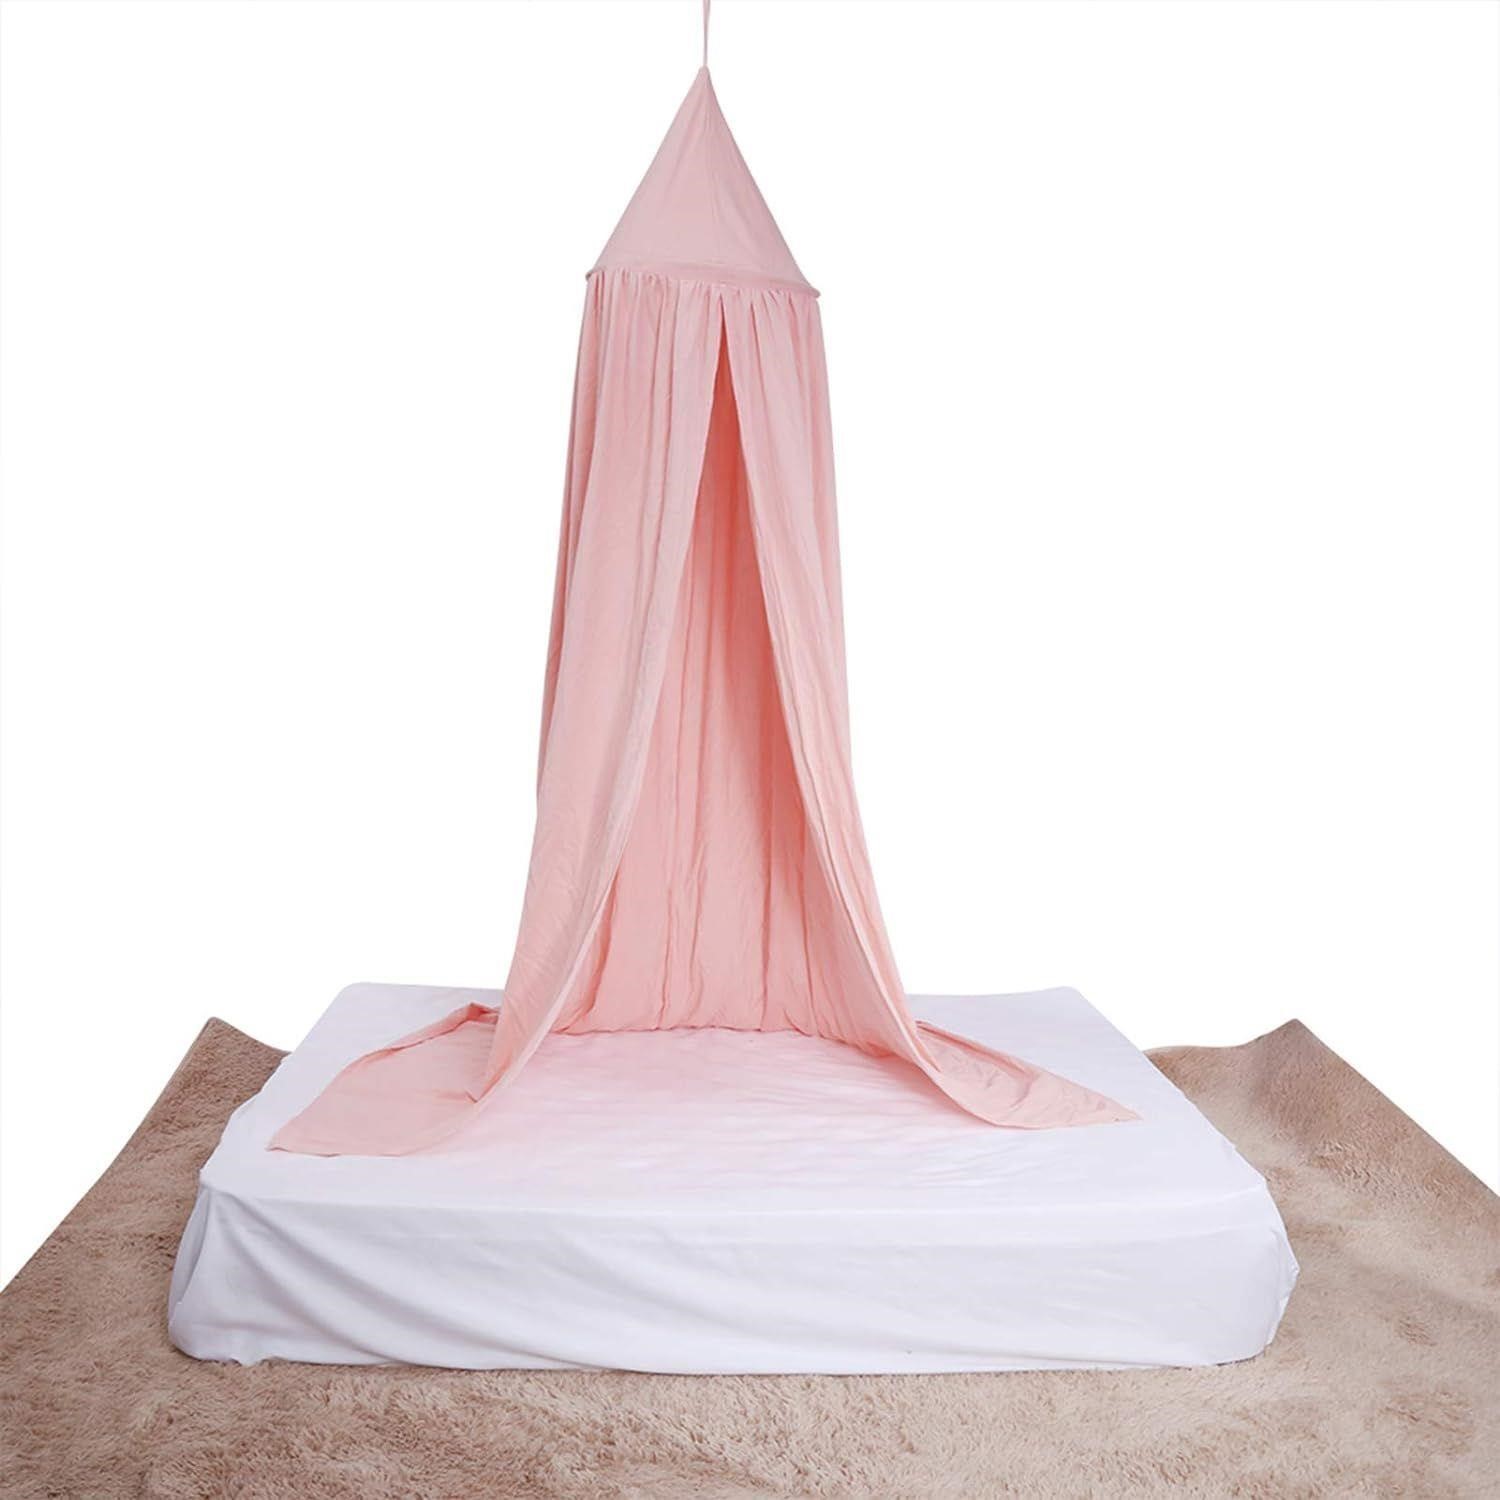 $35 Cotton Bed Canopy